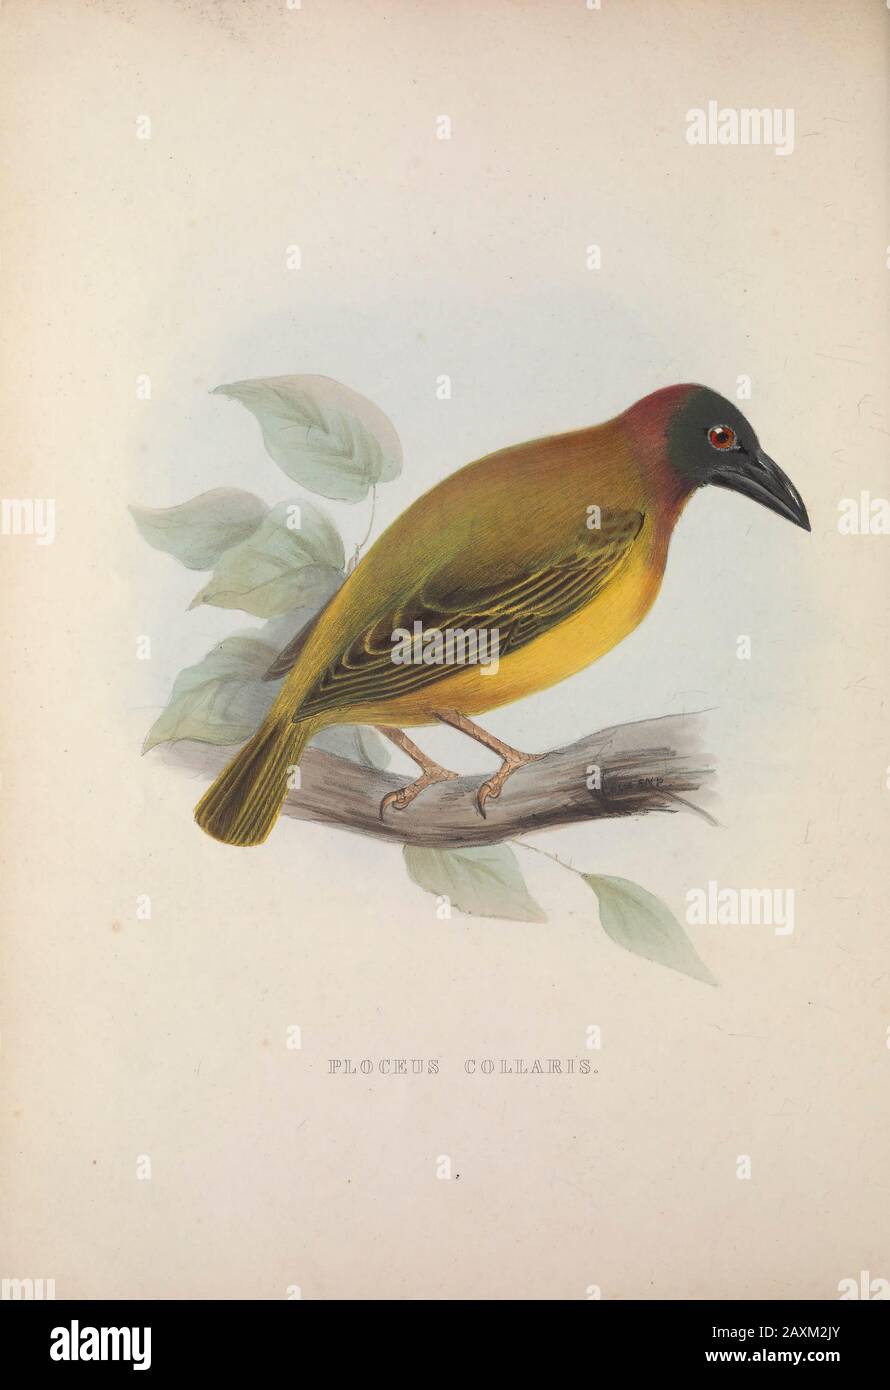 Mottled weaver (Ploceus cucullatus collaris listed Ploceus collaris ), from Zoologia typica; or, Figures of new and rare animals and birds described i Stock Photo